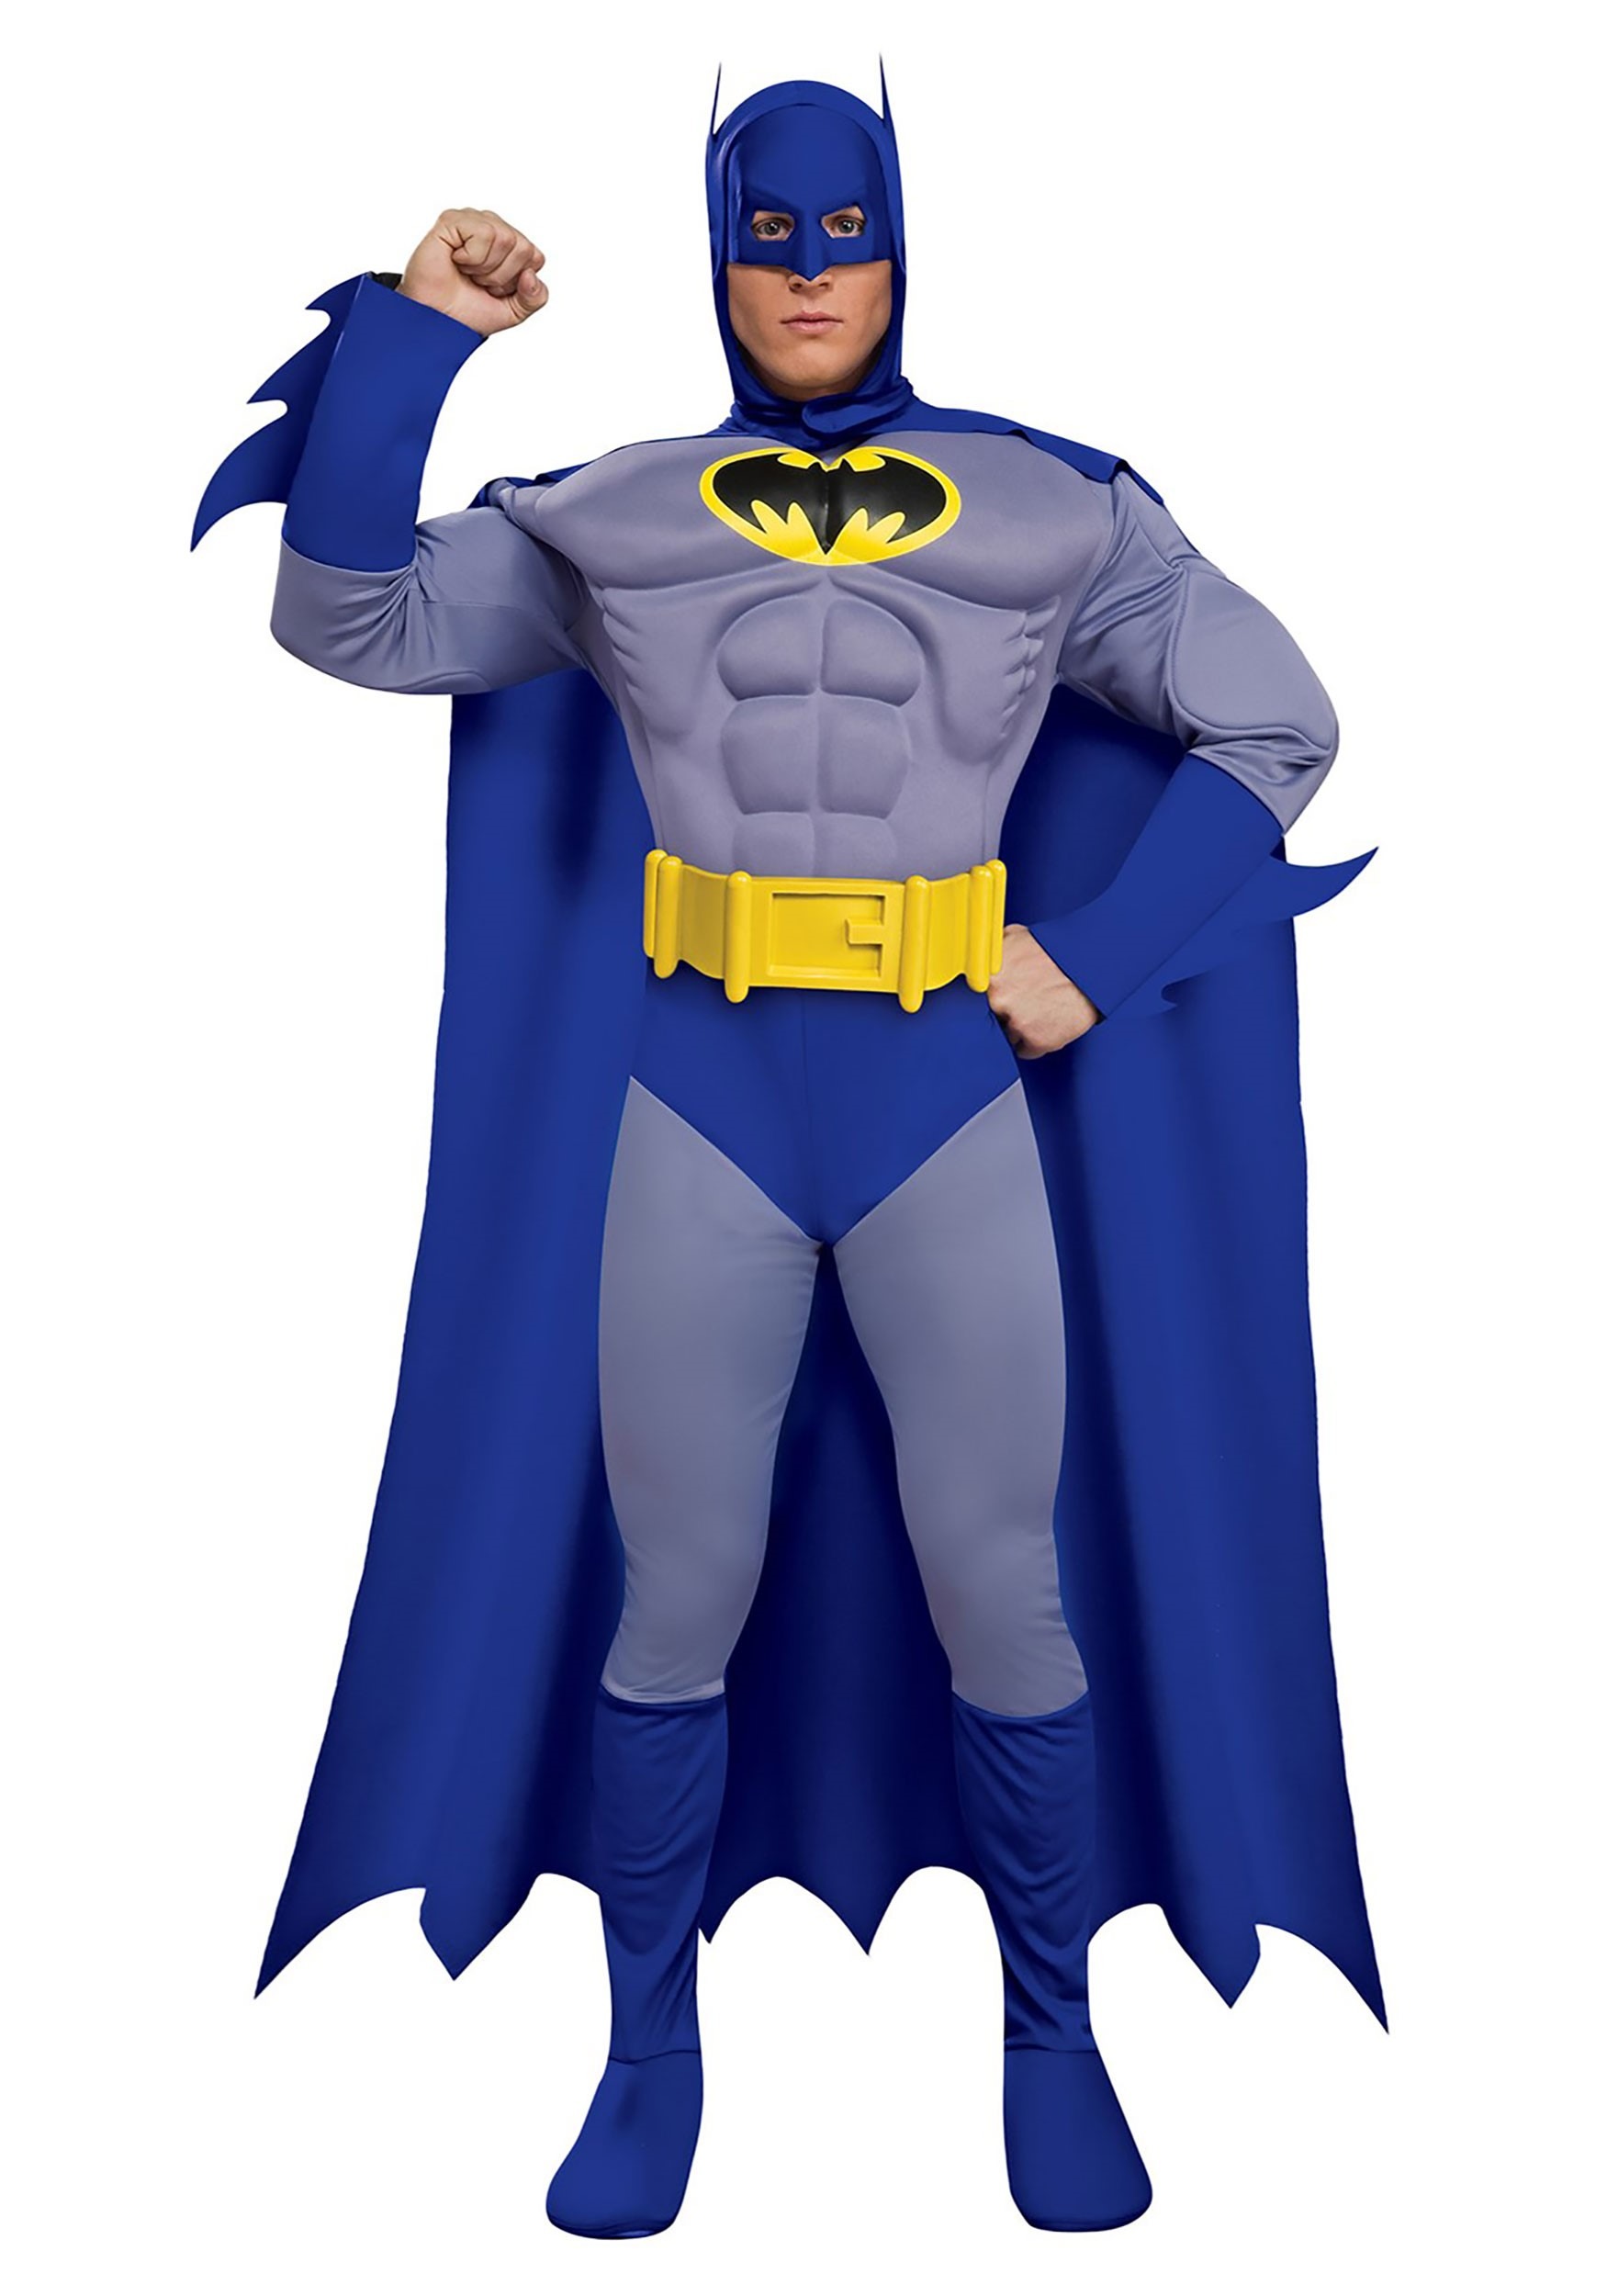 https://images.halloweencostumes.ca/products/14066/1-1/deluxe-muscle-chest-batman-costume.jpg